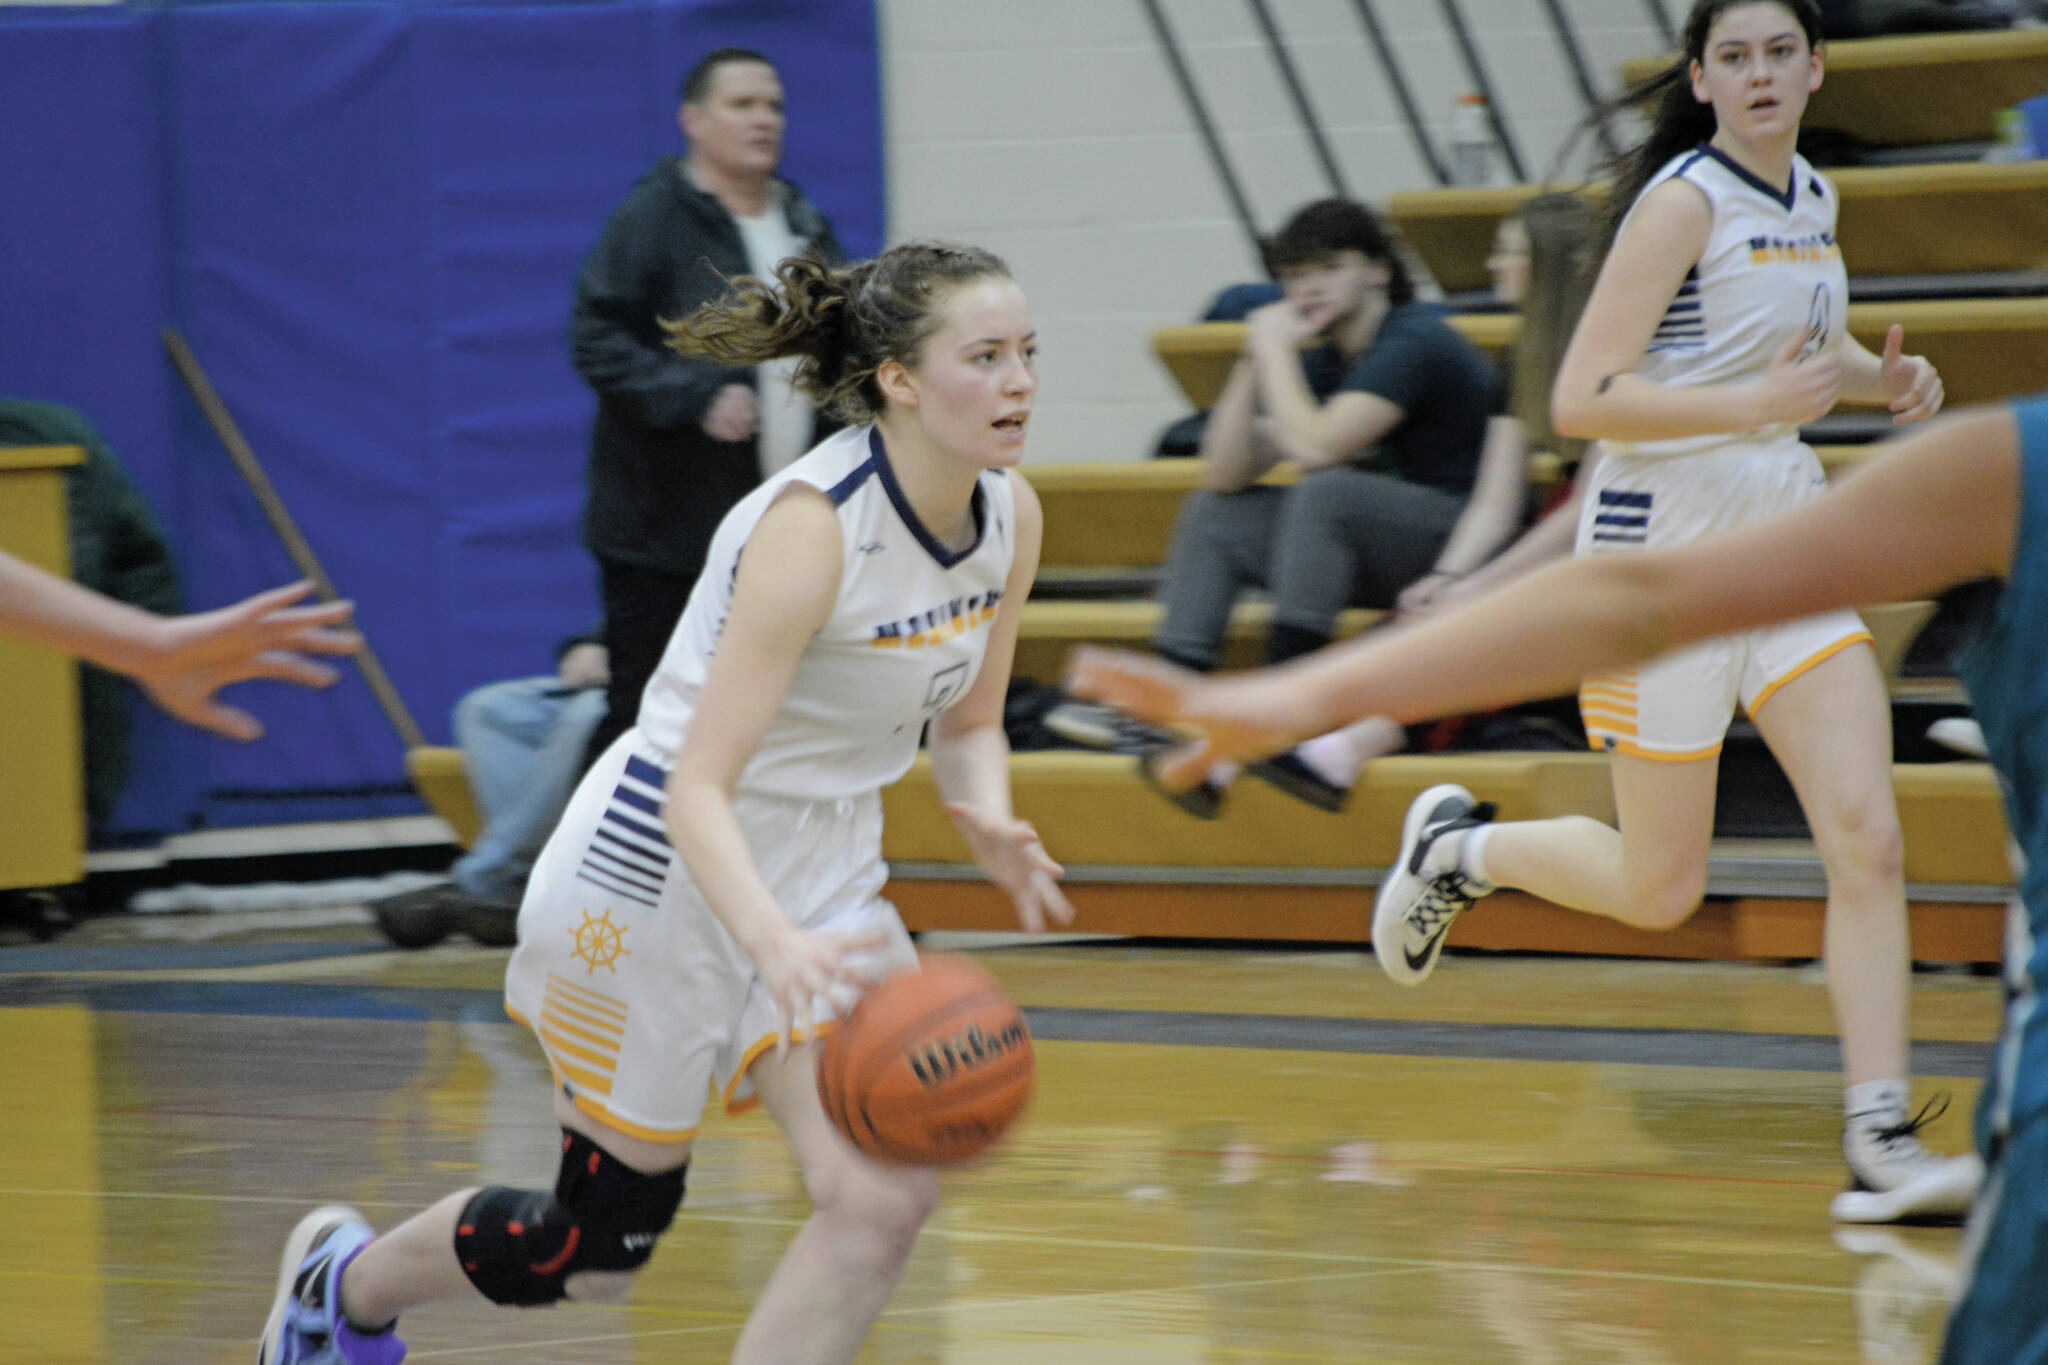 Lady Mariner Kaylin Anderson drives the ball down the court against the Lady Bulldogs during Senior Night on Friday, Feb. 25, 2022, at the Alice Witte Gym at Homer High School in Homer, Alaska. (Photo by Michael Armstrong/Homer News)